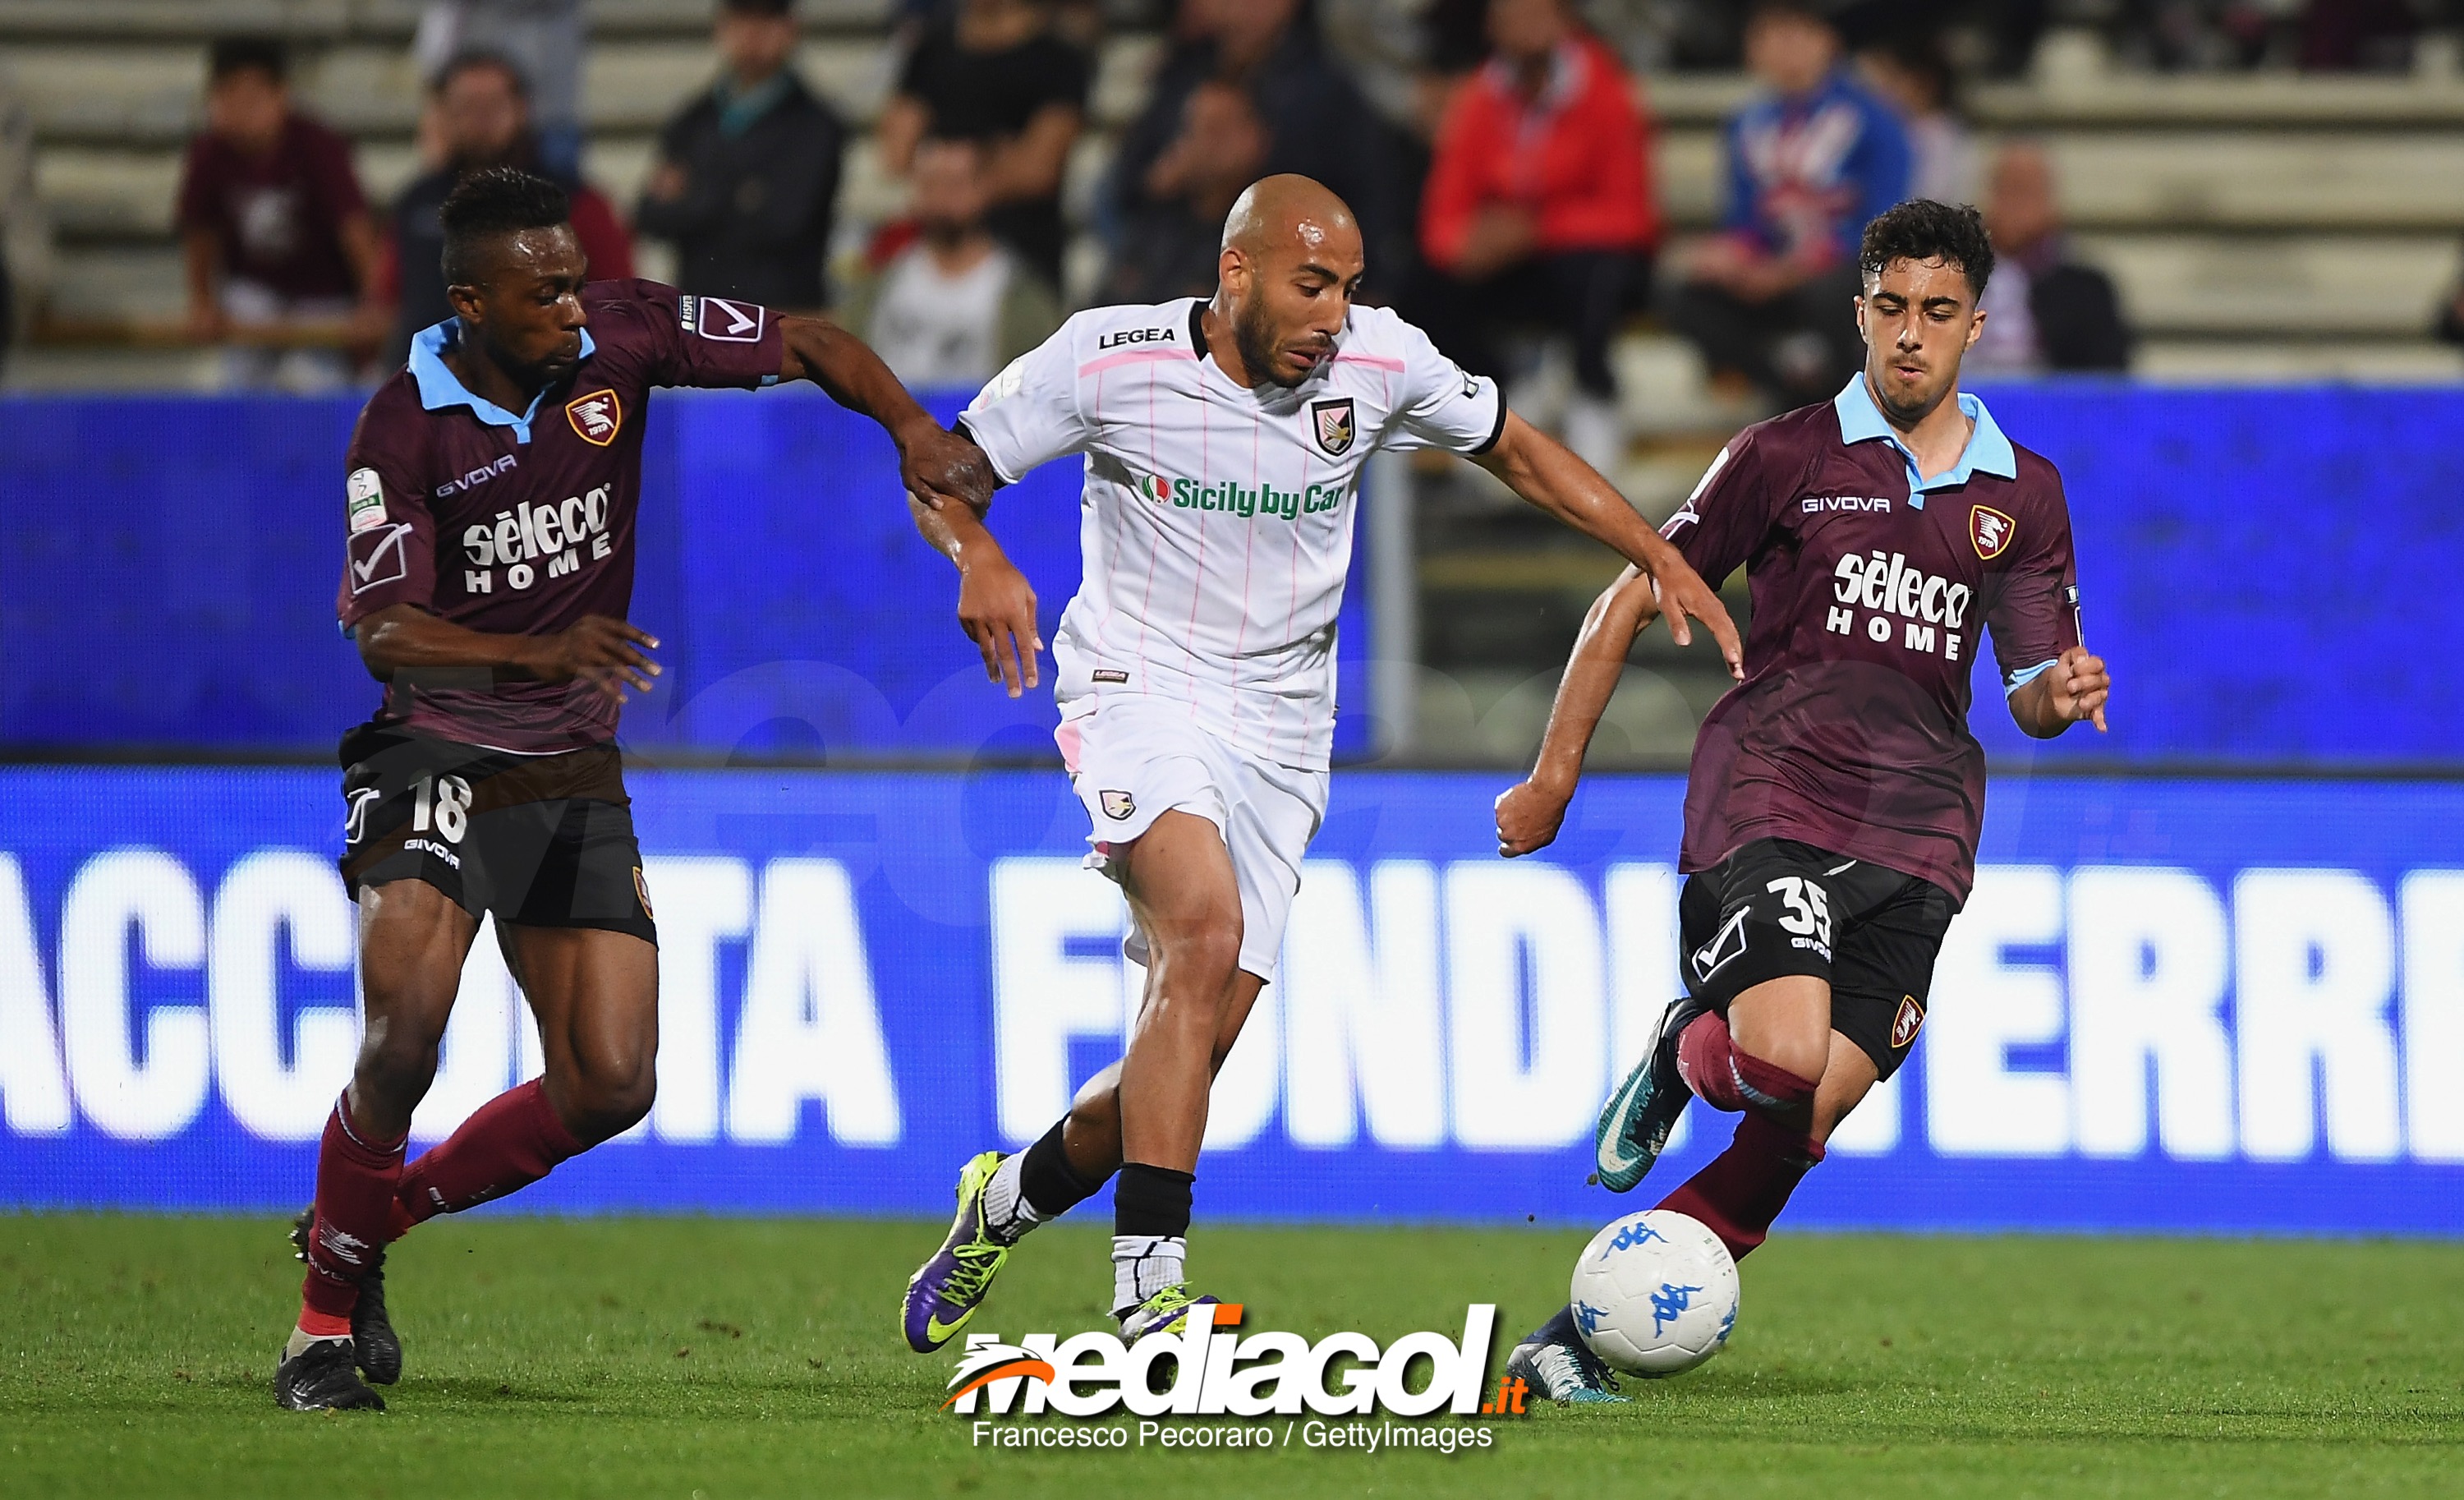 SALERNO, ITALY - MAY 18: Player of US Salernitana Akpa Akpro vies with US Citta di Palermo player Haitam Aleesami during the Serie B match between US Salernitana and US Citta di Palermo at Stadio Arechi on May 18, 2018 in Salerno, Italy.  (Photo by Francesco Pecoraro/Getty Images)